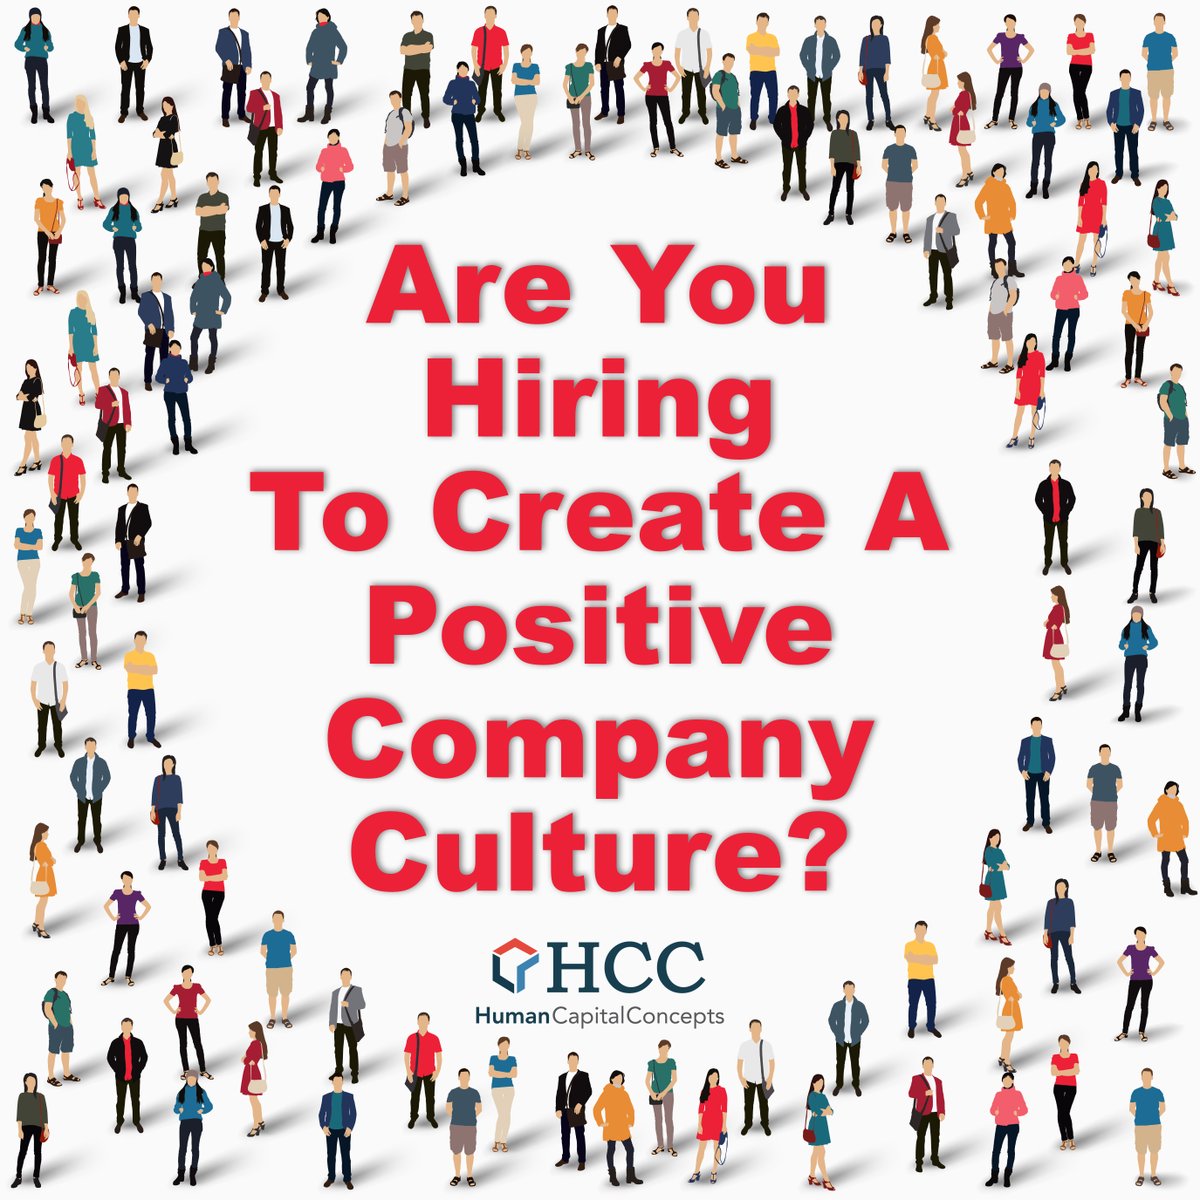 Hiring for cultural fit means aligning values and expectations. Is your organization strategically hiring to create a positive culture that attracts the right employees? #PEO #HCC #HRSolutions #HRManagement #HRConsulting #CompanyCulture #CulturalFit businessnewsdaily.com/6866-hiring-fo…